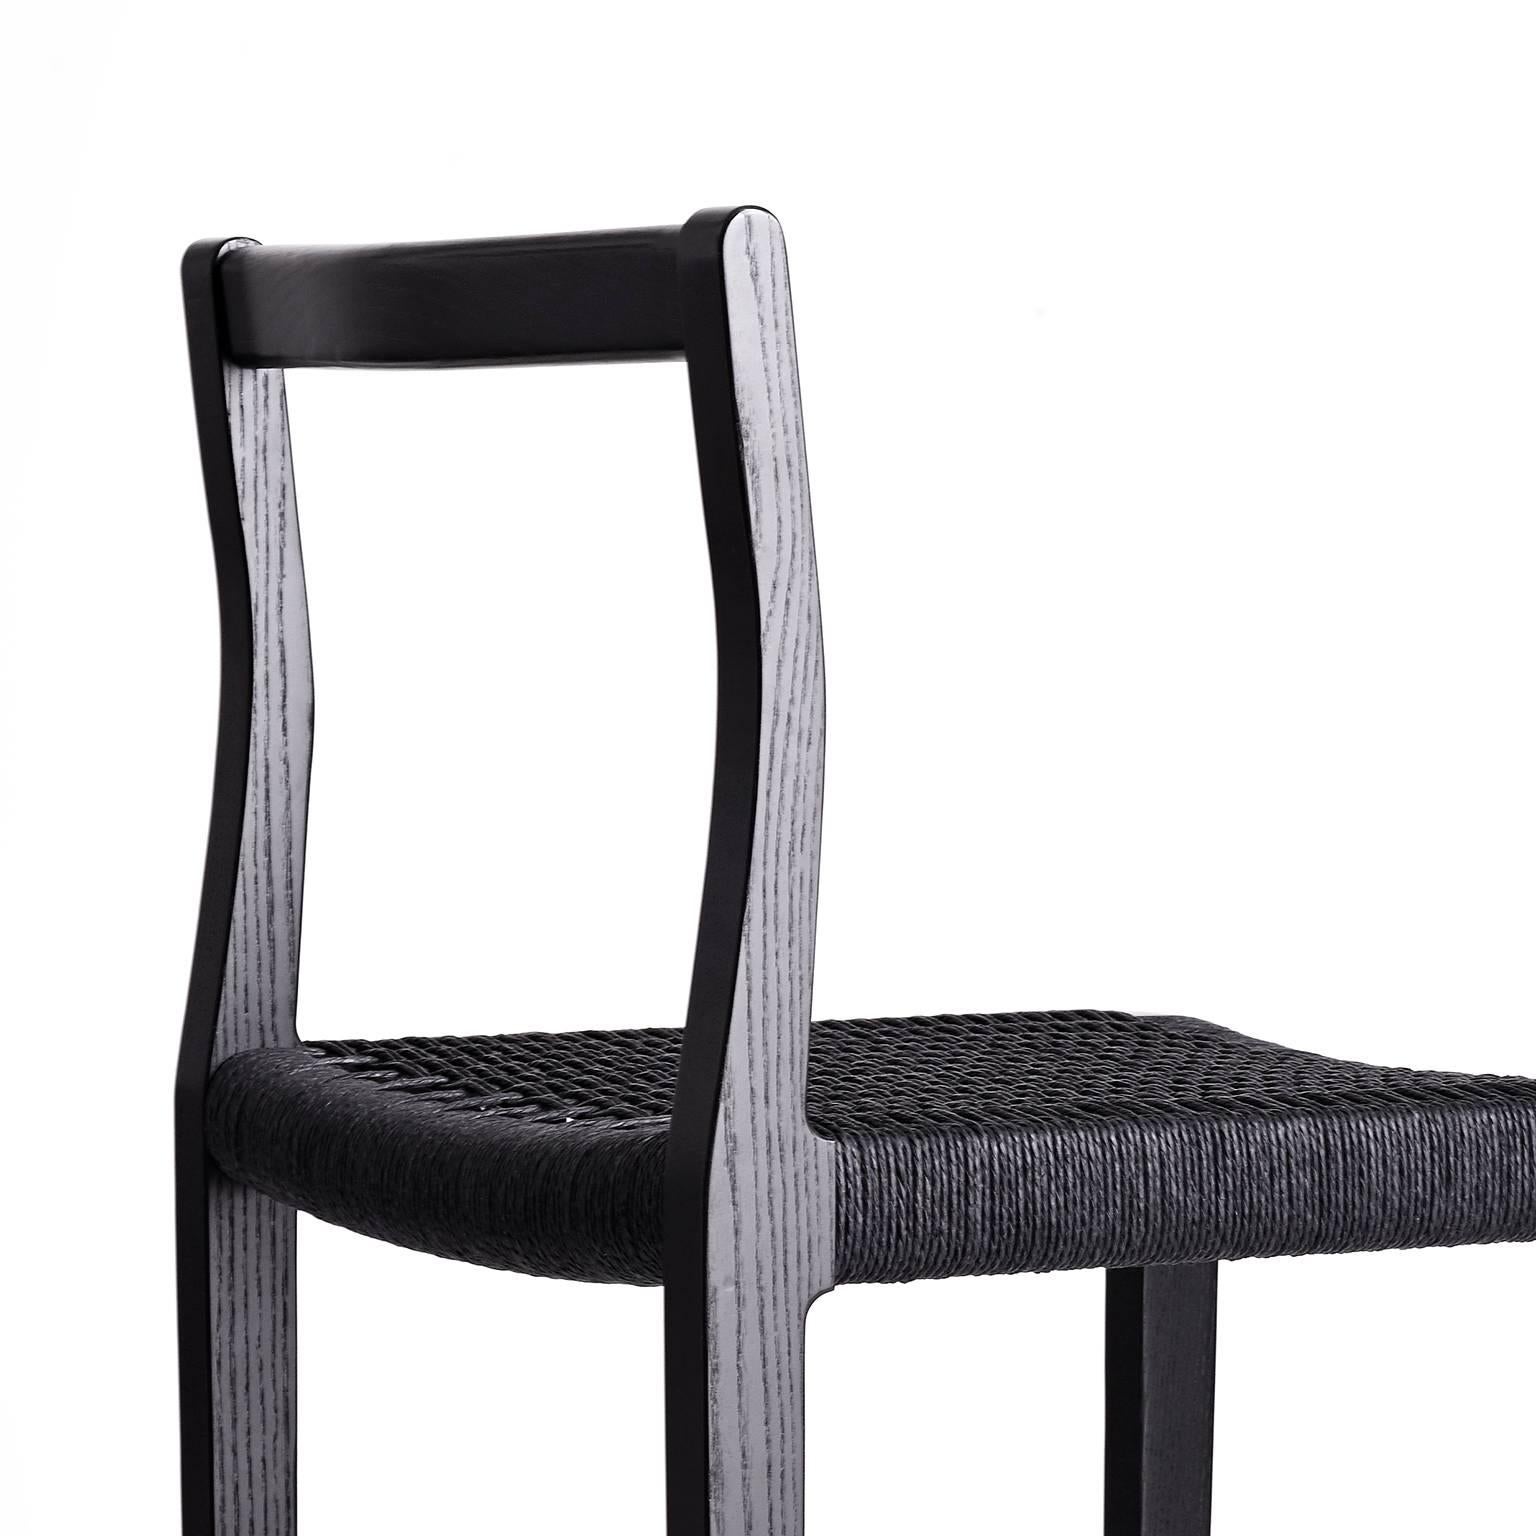 Woven Giacomo Bar Stools (2) in Ebonized Ash - DISCOUNTED 50% - available now